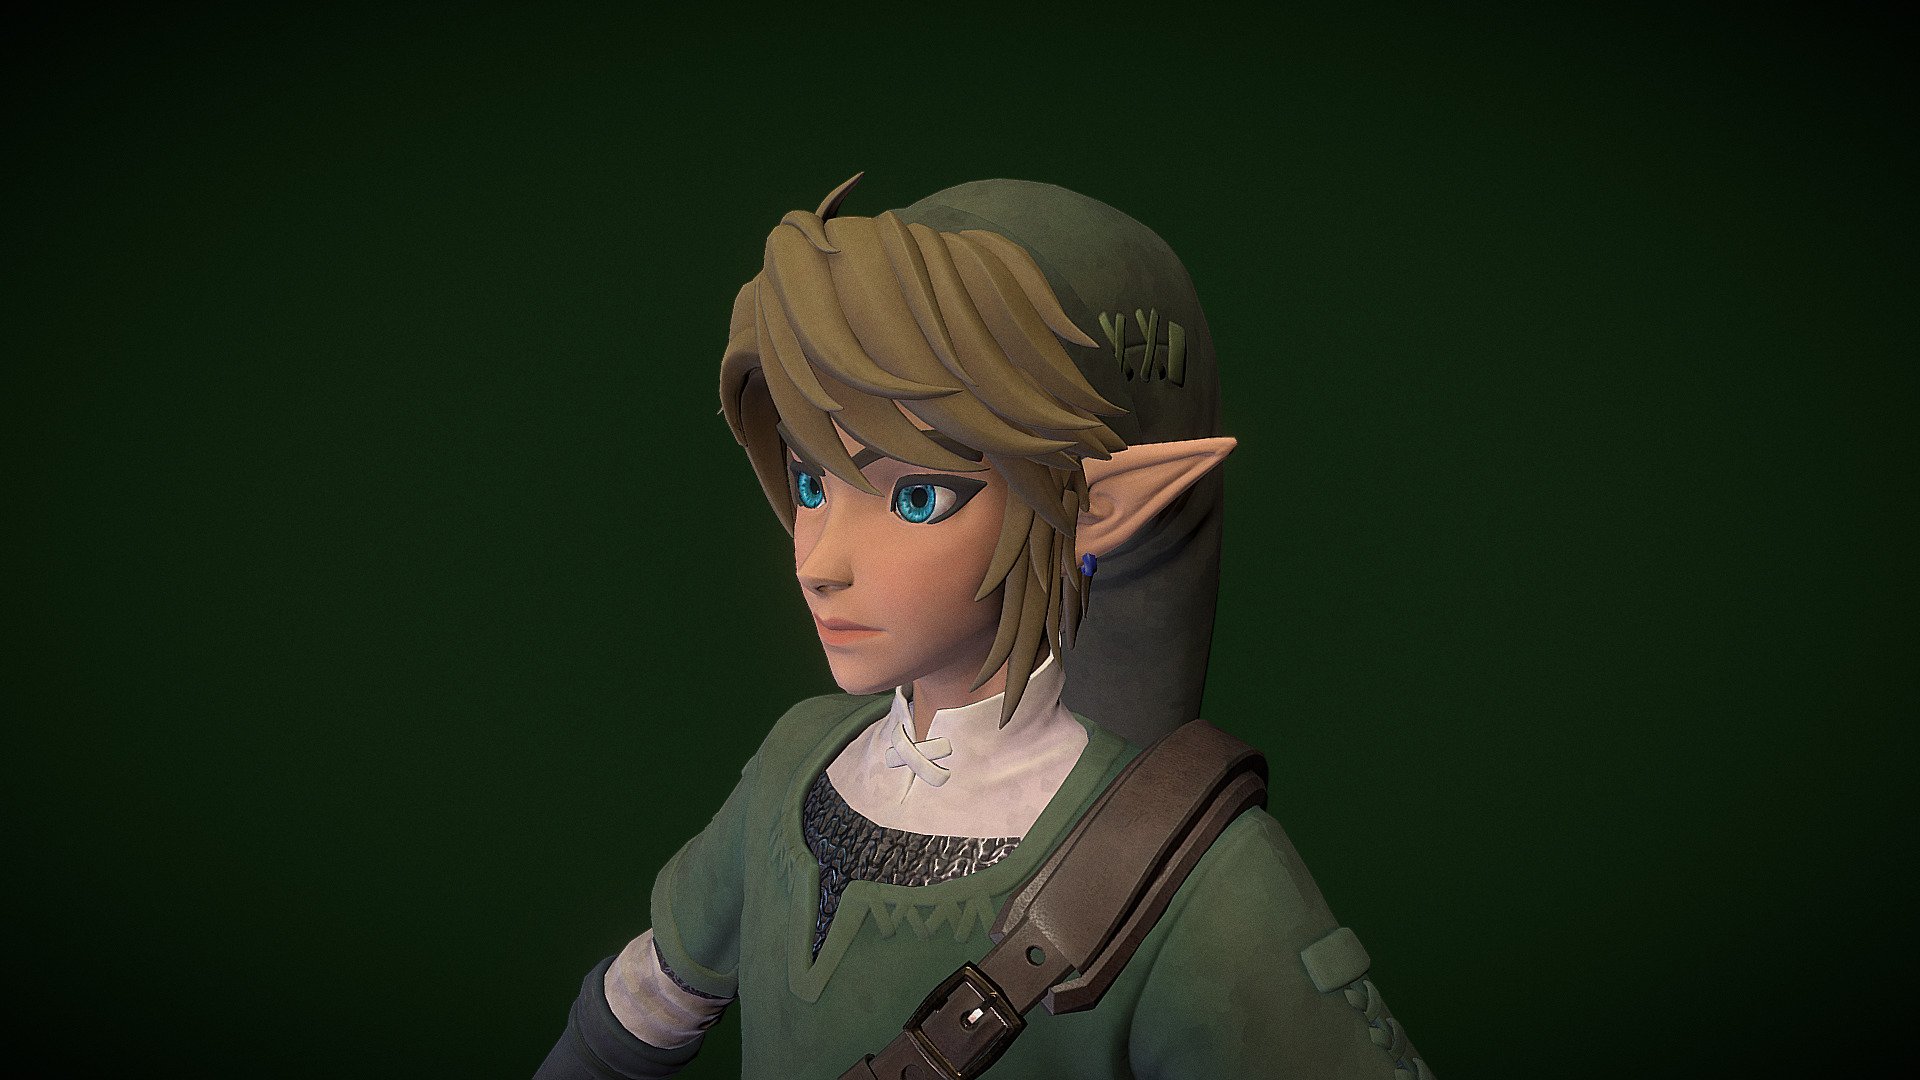 6. "Link with Blue Hair" by Twilight Princess - wide 5